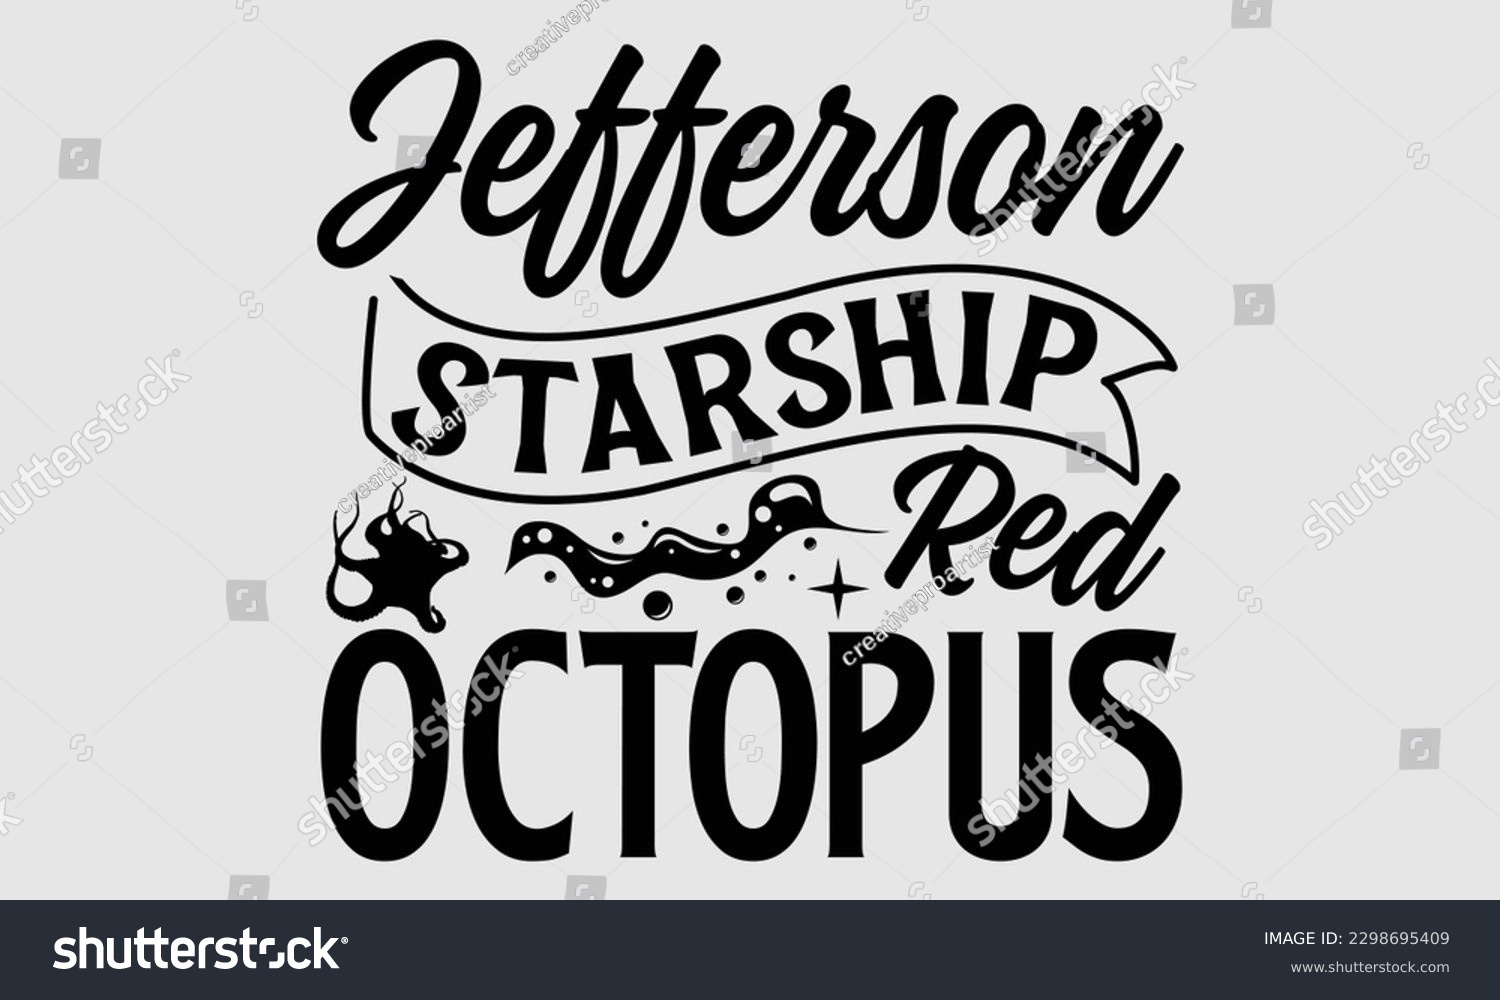 SVG of Jefferson starship red octopus- Octopus SVG and t- shirt design, Hand drawn lettering phrase for Cutting Machine, Silhouette Cameo, Cricut, greeting card template with typography white background, EPS svg